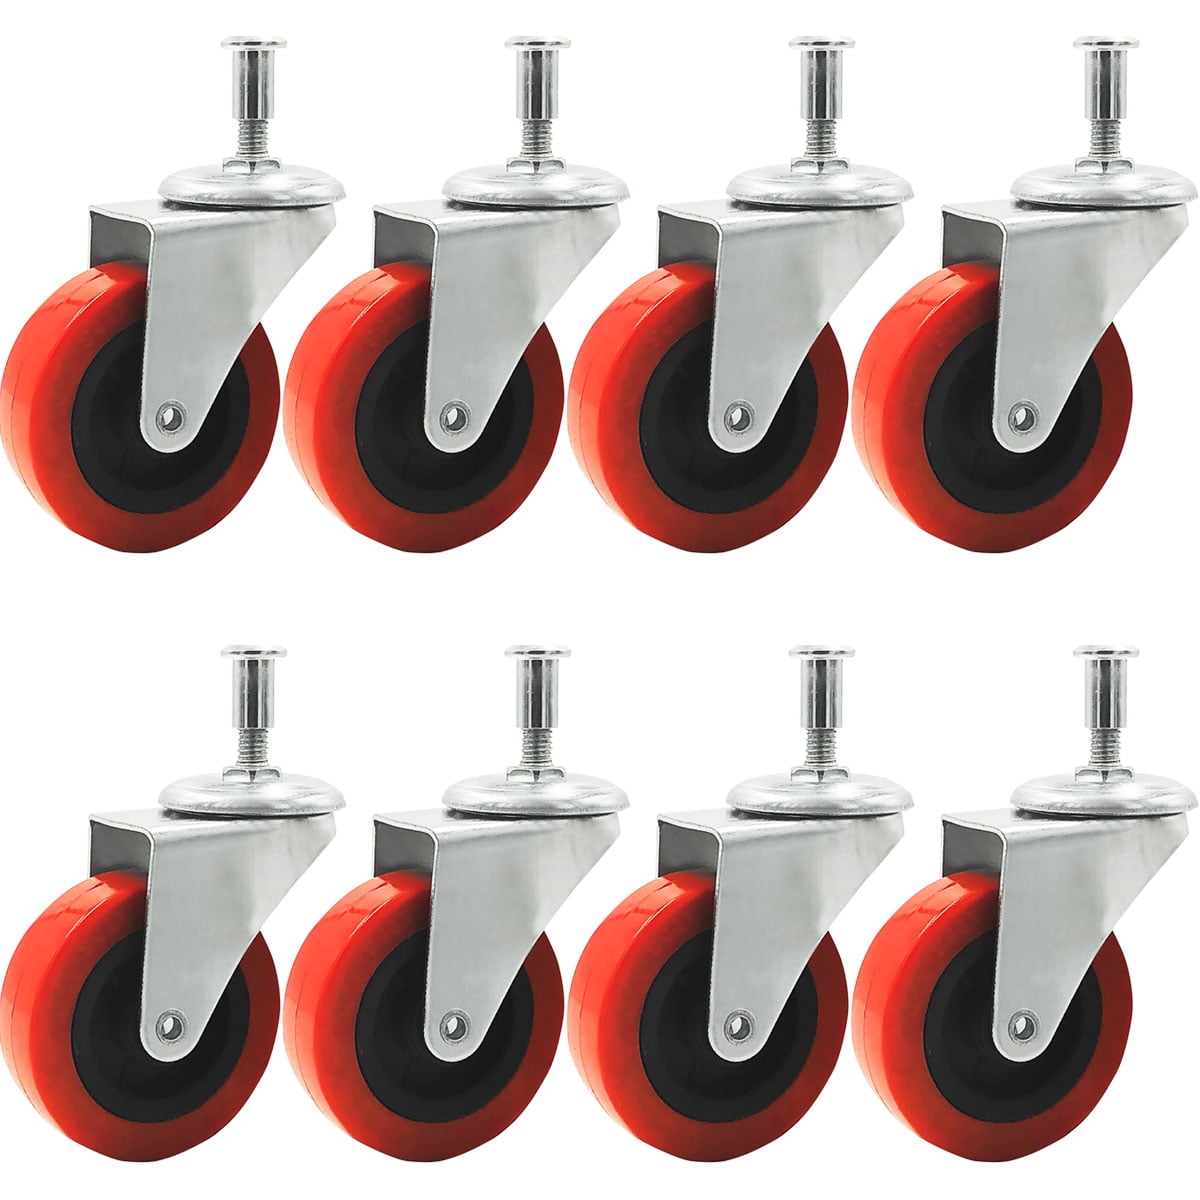 2 Pack Heavy-Duty Jeepers Creepers 2" Swivel Caster Wheels FREE SHIPPING in USA 